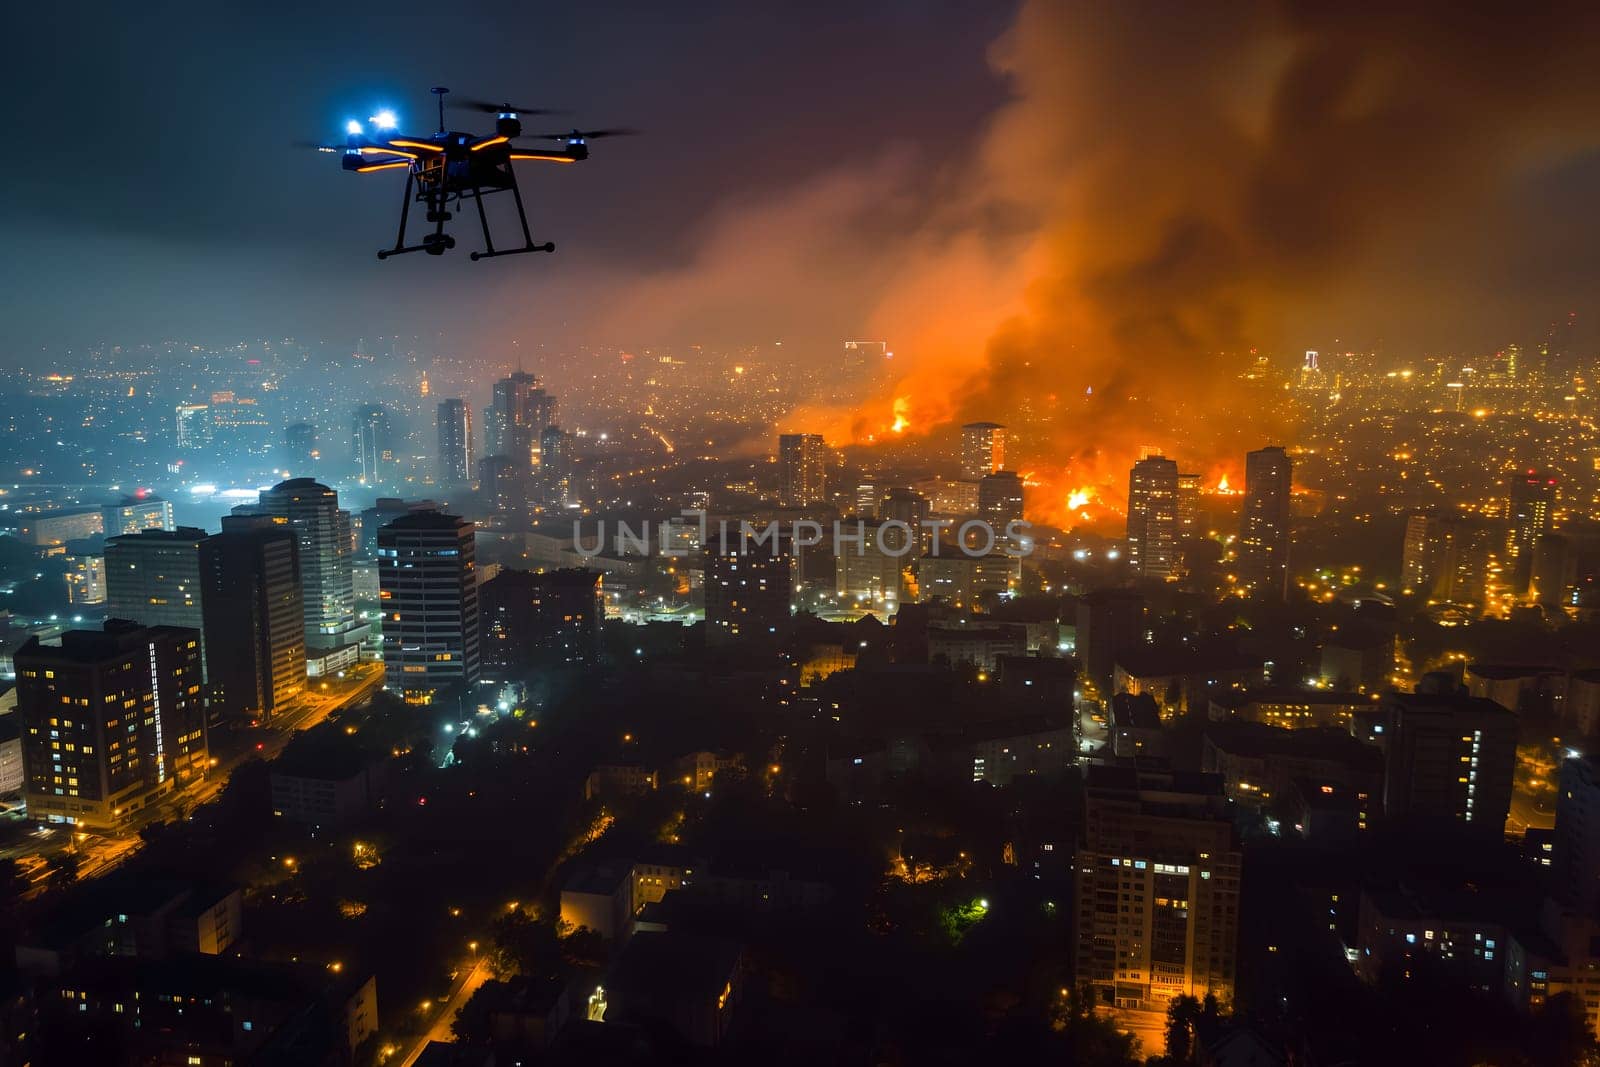 Copter drone over burning city at night by z1b